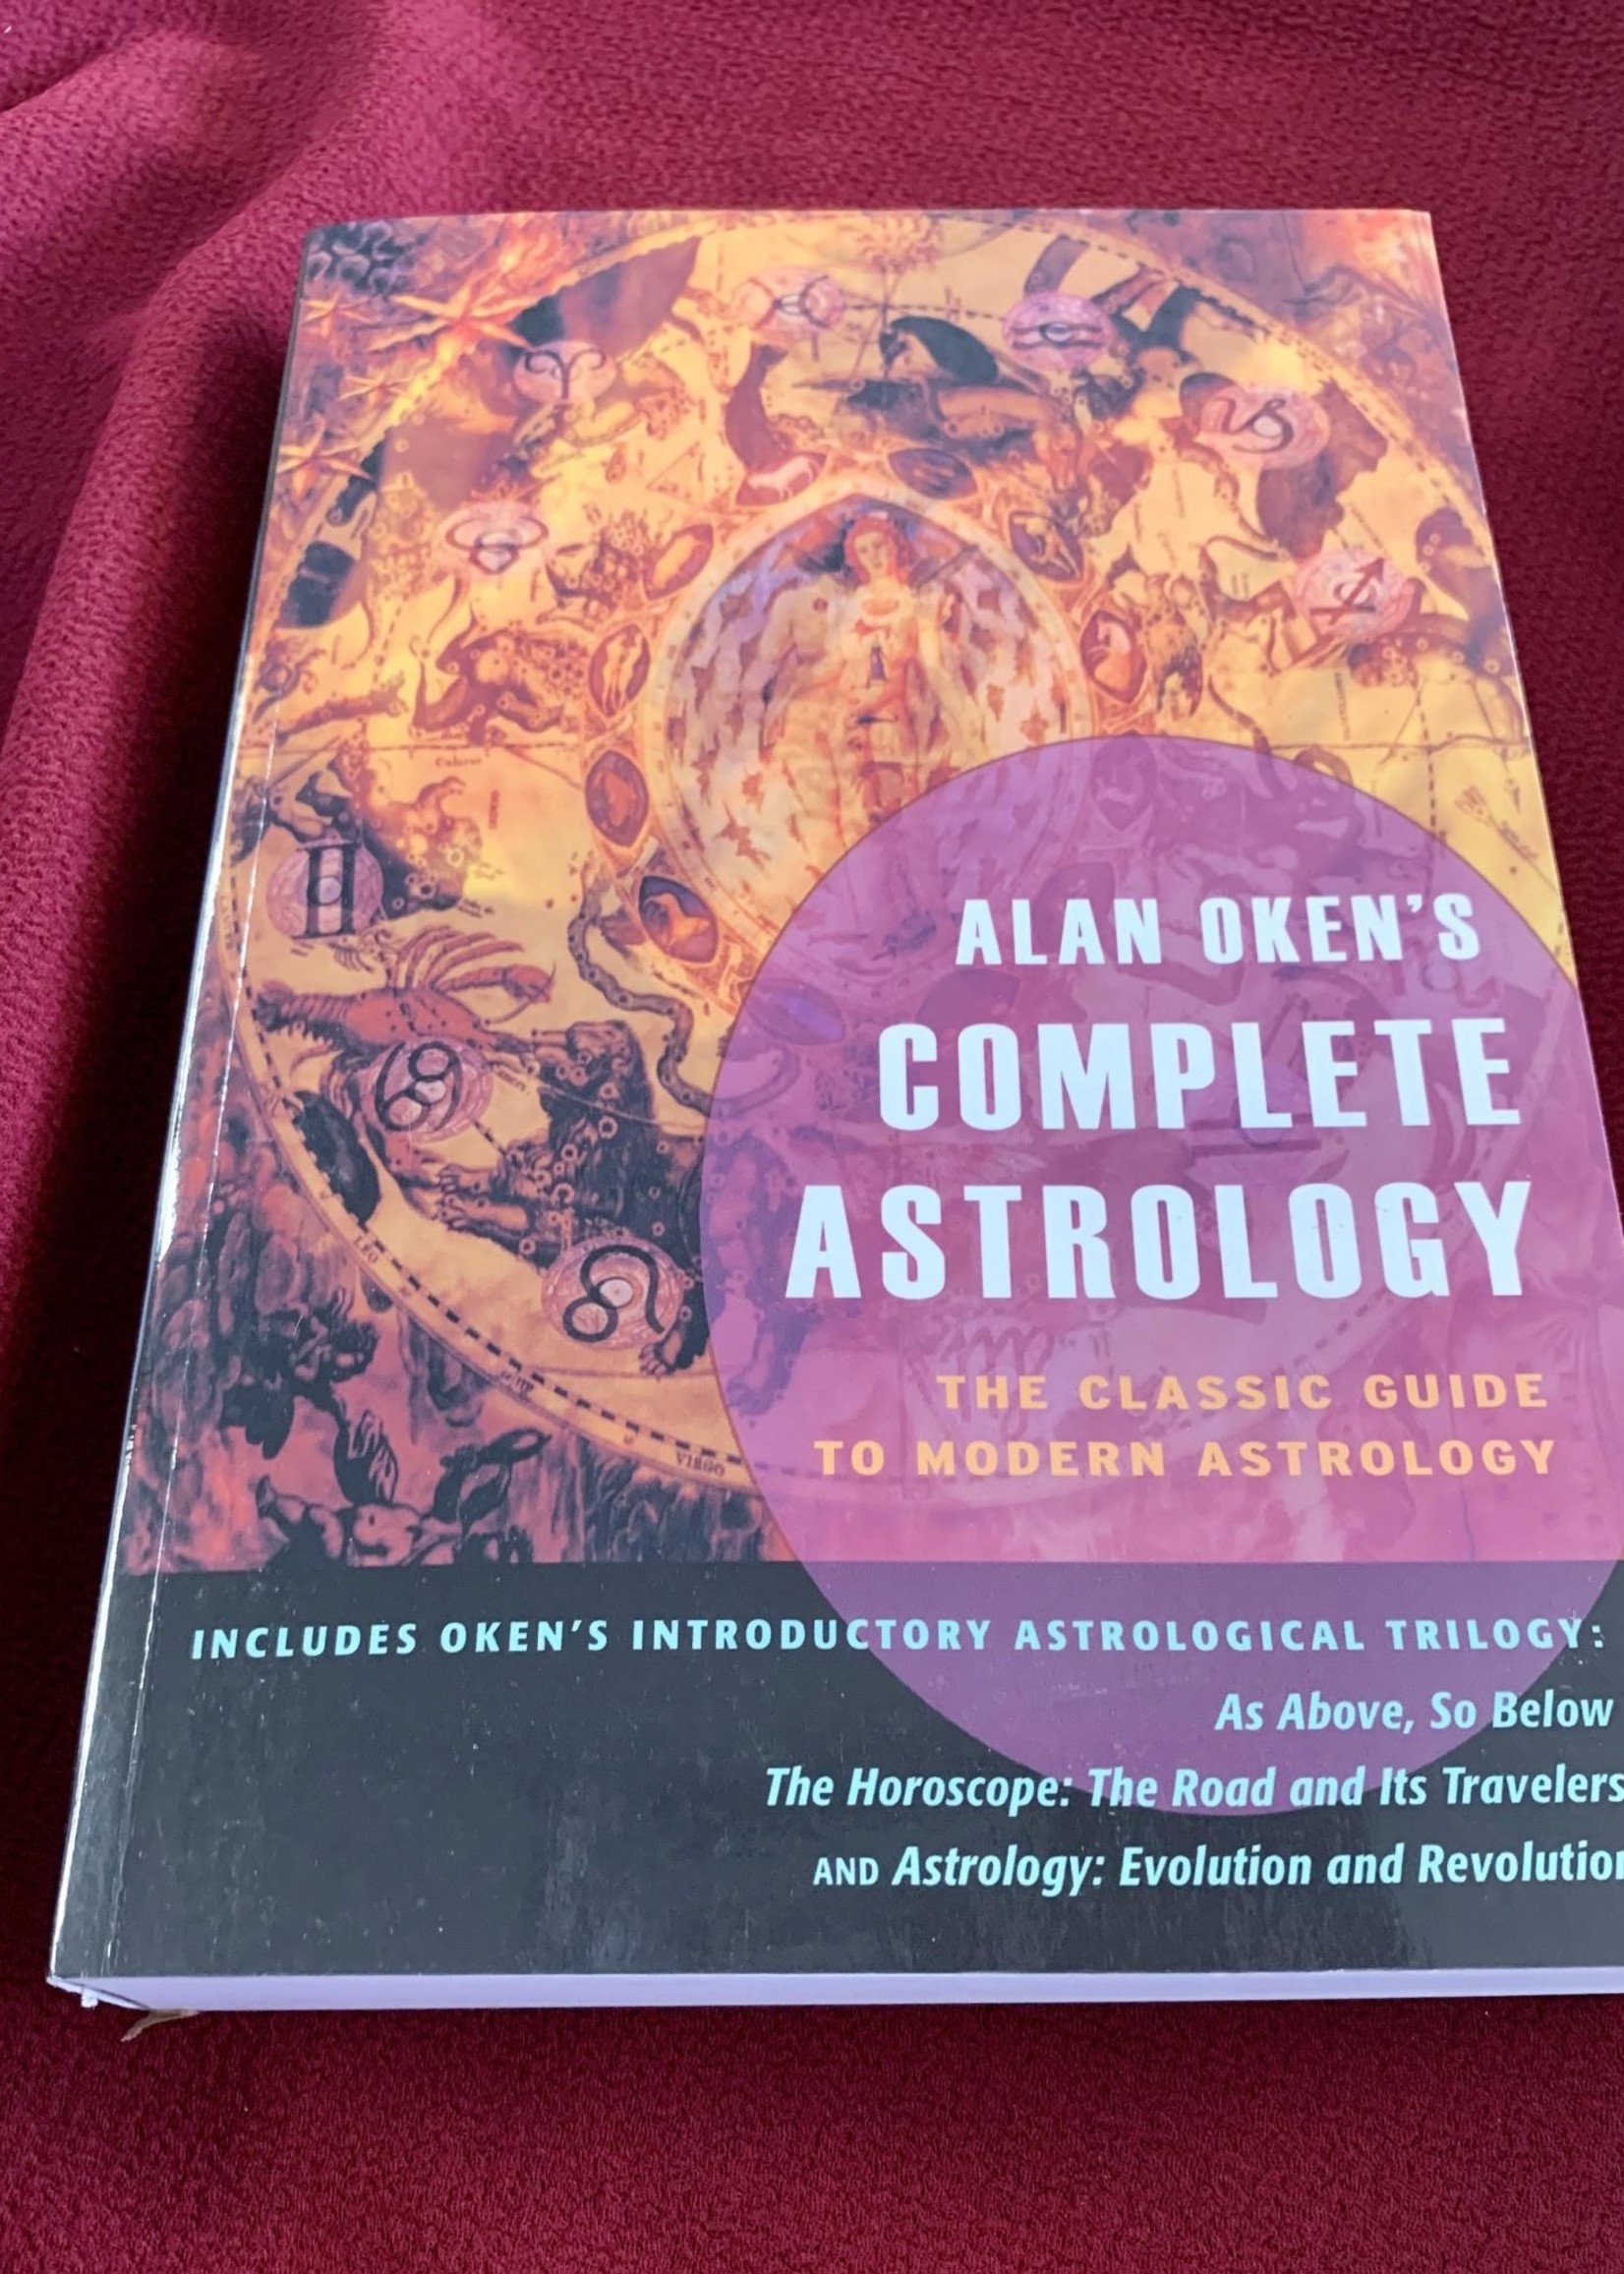 Alan Oken's Complete Astrology The Classic Guide to Modern Astrology